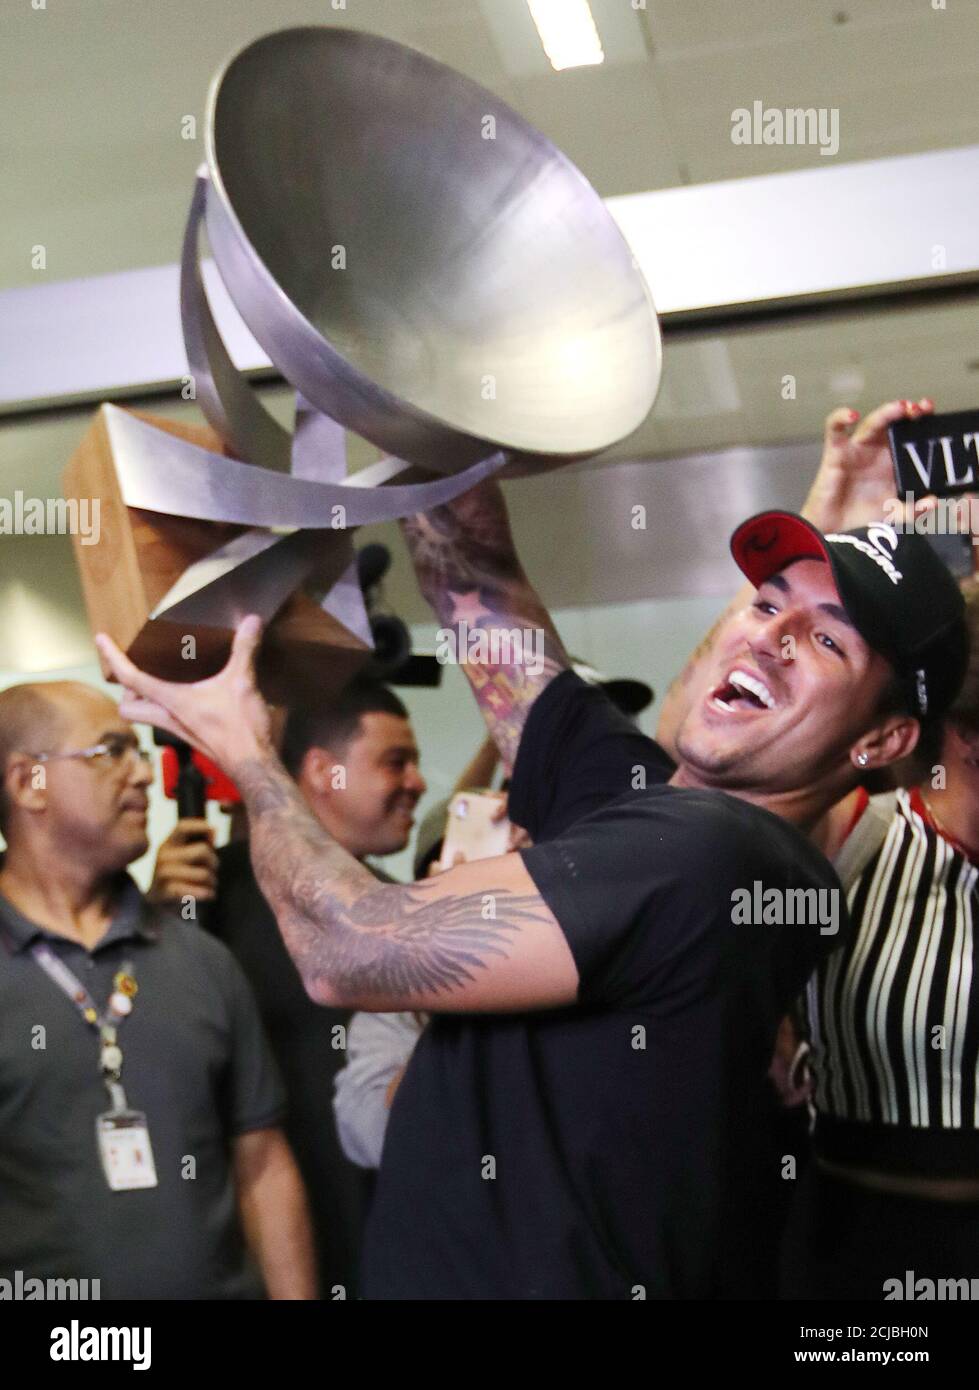 Surfing - Gabriel Medina WSL World Champion arrives in Brazil -  Sao Paulo, Brazil - December 22, 2018    Brazil's Gabriel Medina arrives at the airport and celebrates with the trophy   REUTERS/Paulo Whitaker Stock Photo